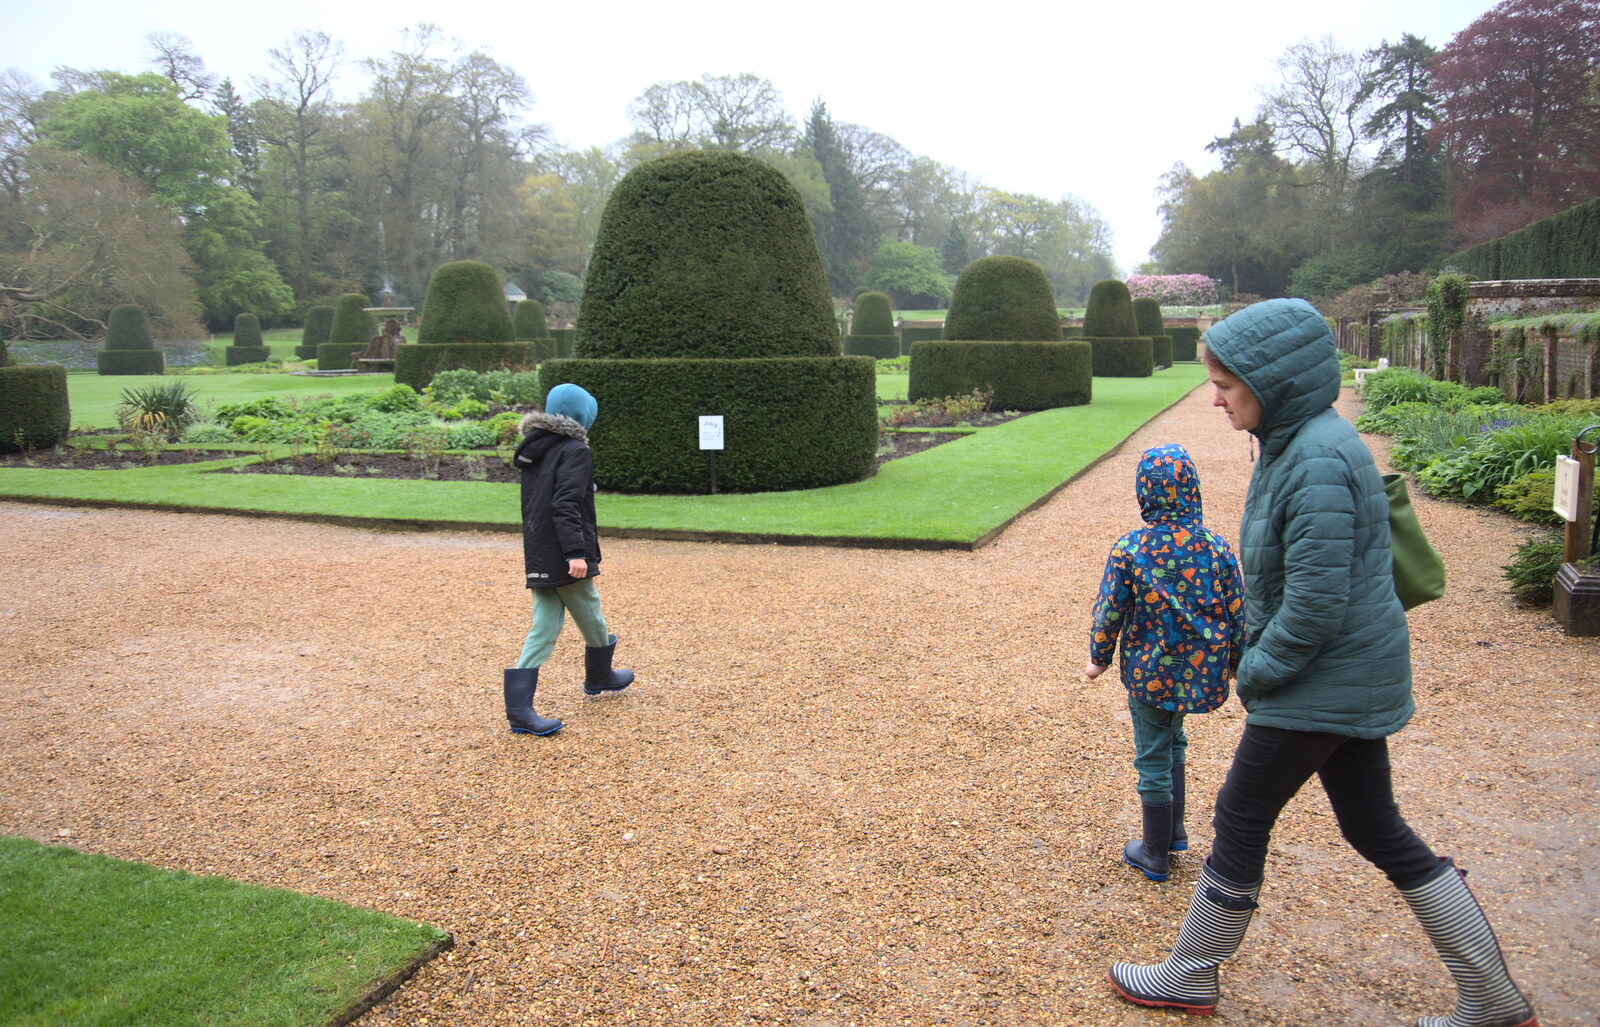 We explore the gardens in the drizzle from A Trip to Blickling Hall, Aylsham, Norfolk - 29th April 2018